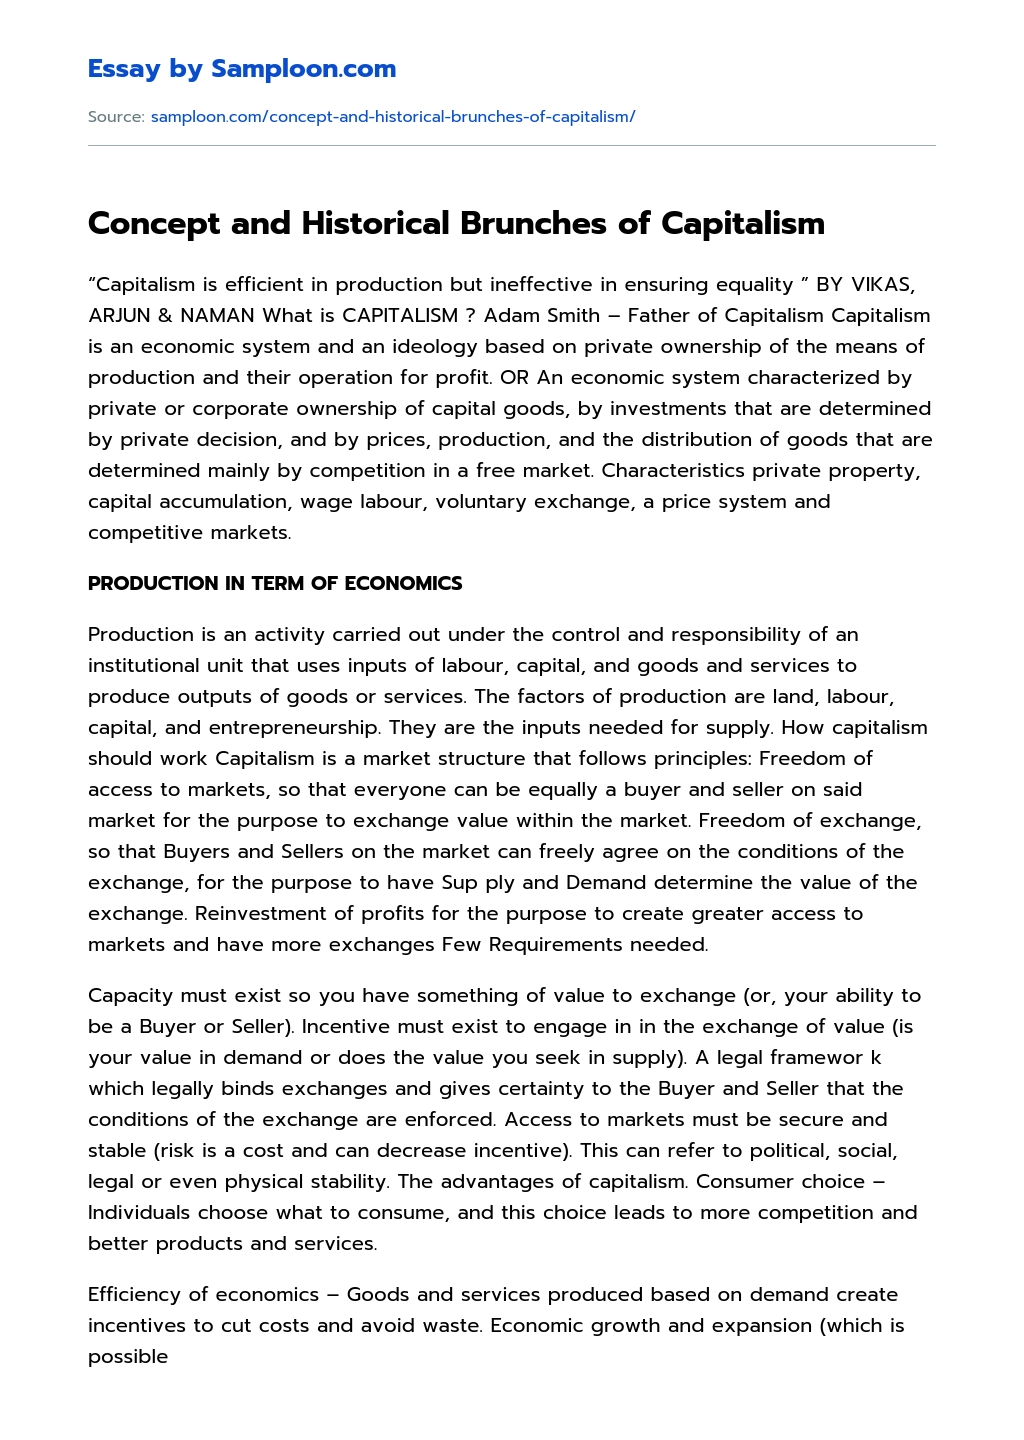 Concept and Historical Brunches of Capitalism essay